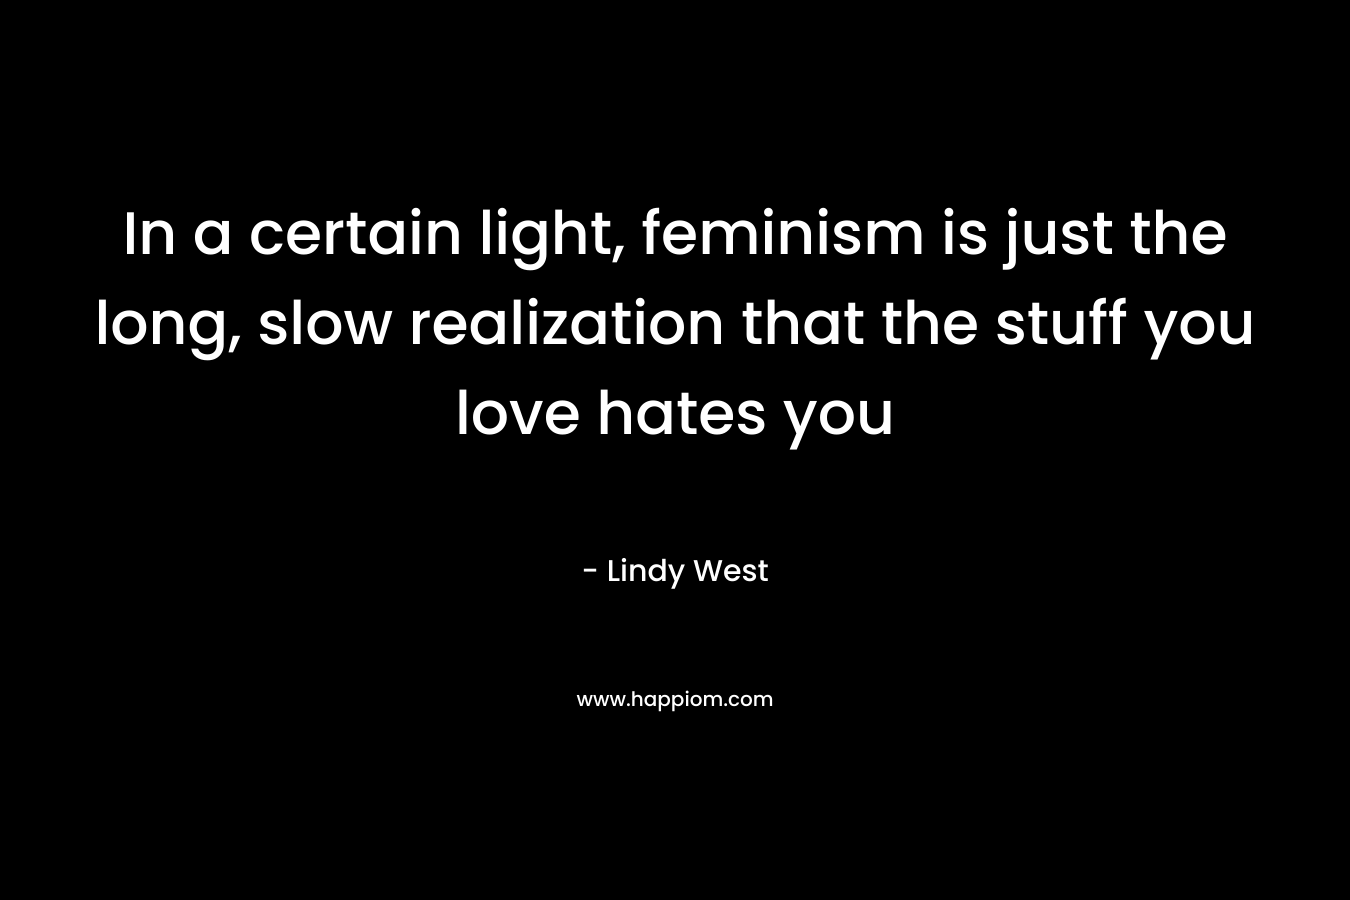 In a certain light, feminism is just the long, slow realization that the stuff you love hates you